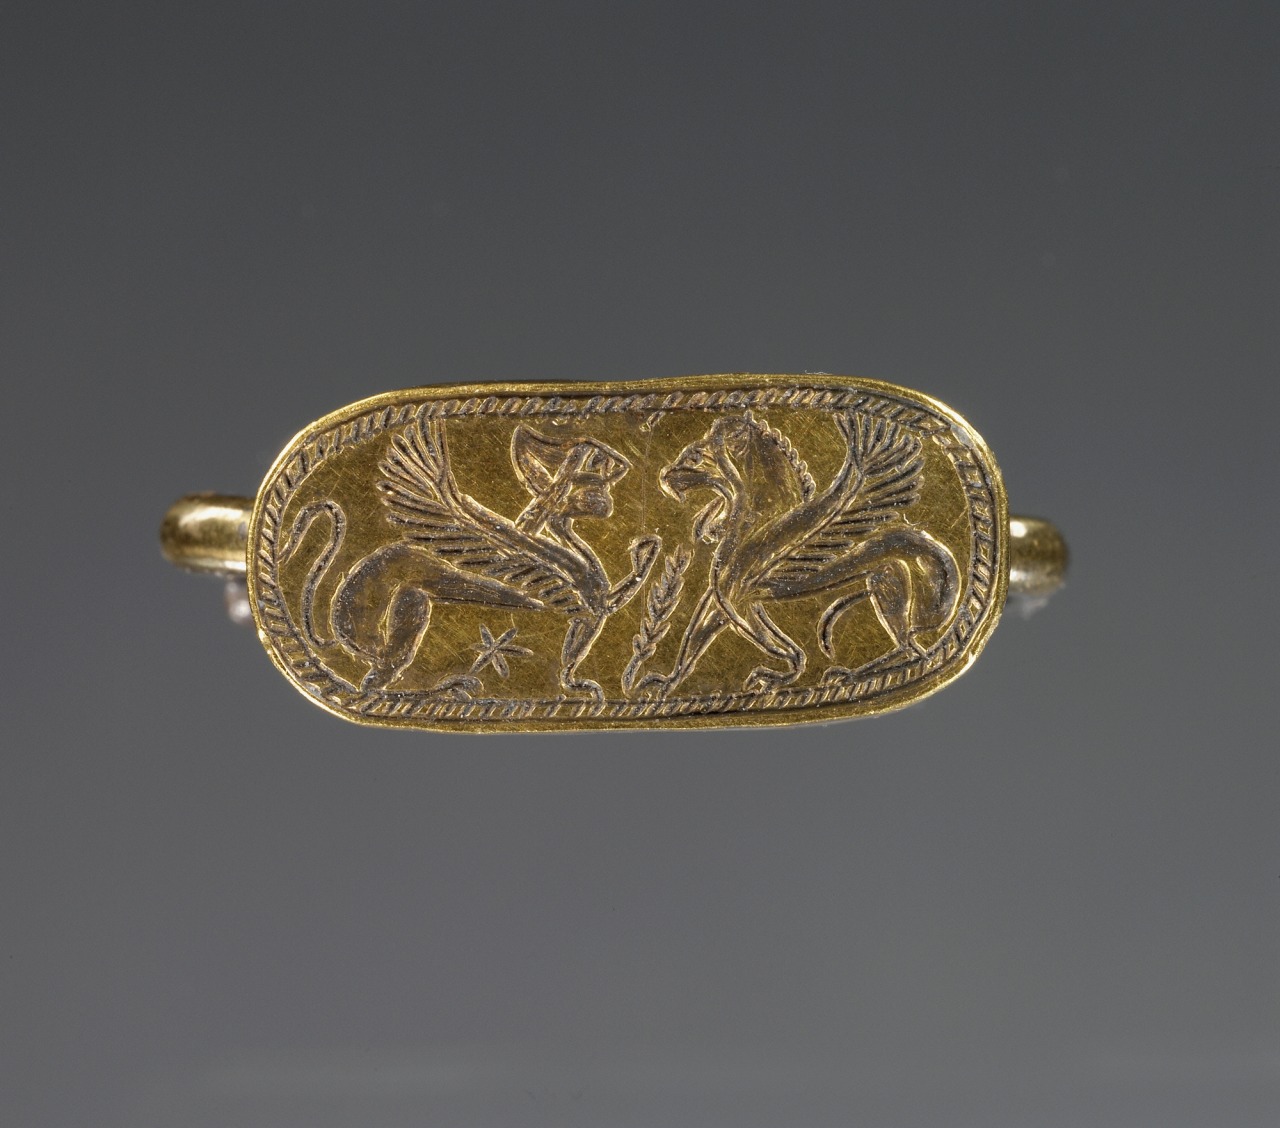 The style of this ring was introduced by immigrant Greek goldsmiths from Ionia. Its shape, long straight sides and rounded edges, is derived from Egyptian and Phoenician cartouche-shaped rings. What a beautiful meeting of cultures!
Winged Lion and...